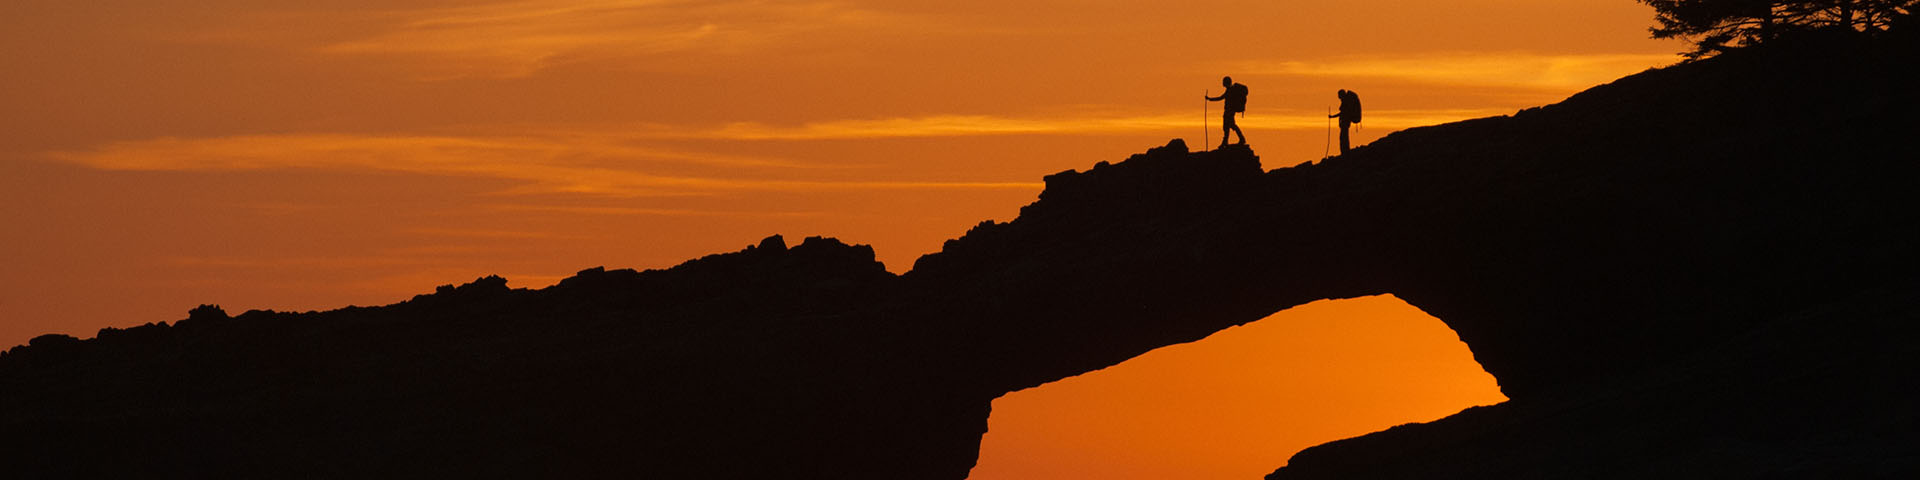 Two hikers in silhouette with packs and poles, cross natural land bridge above water. Orange sunset fills sky in background